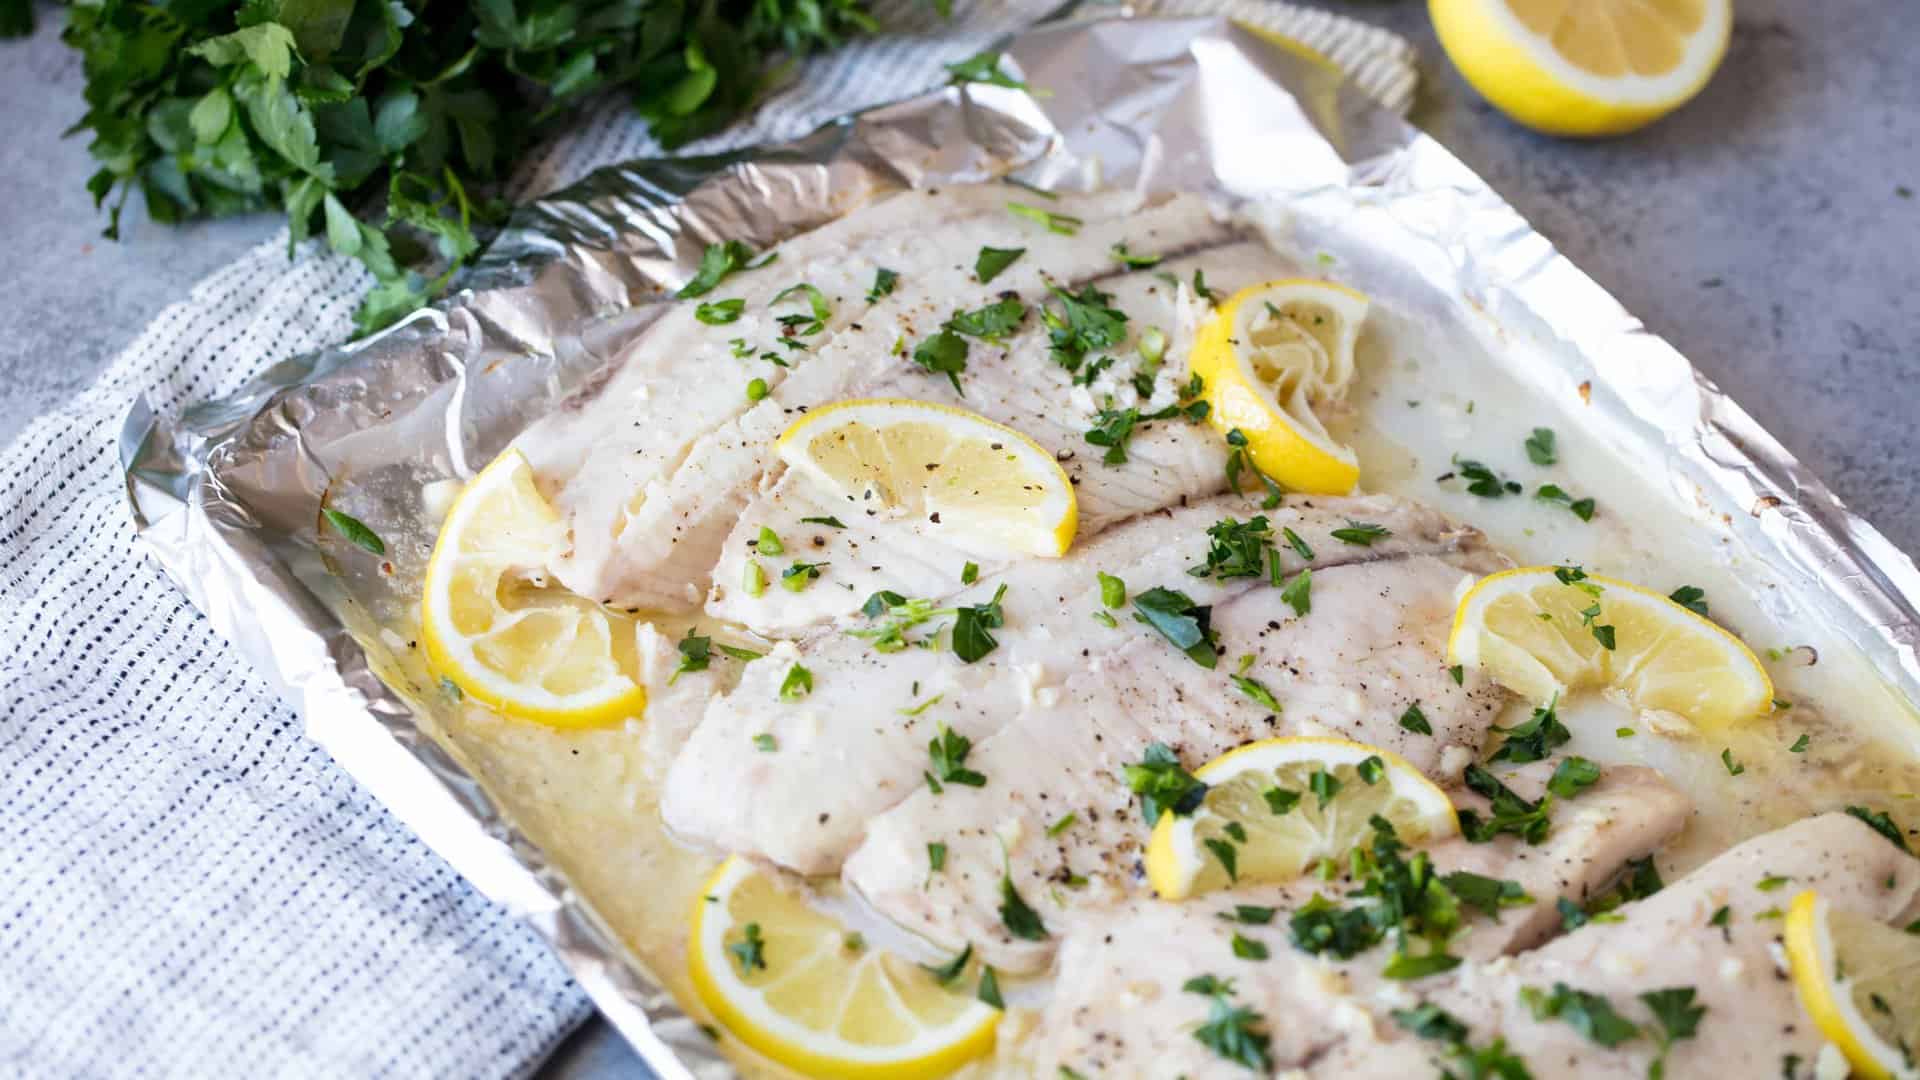 Baked Lemon Garlic Tilapia is the easiest and tastiest way to get healthy fish onto the dinner plate. Cooking fish at home has never been easier!